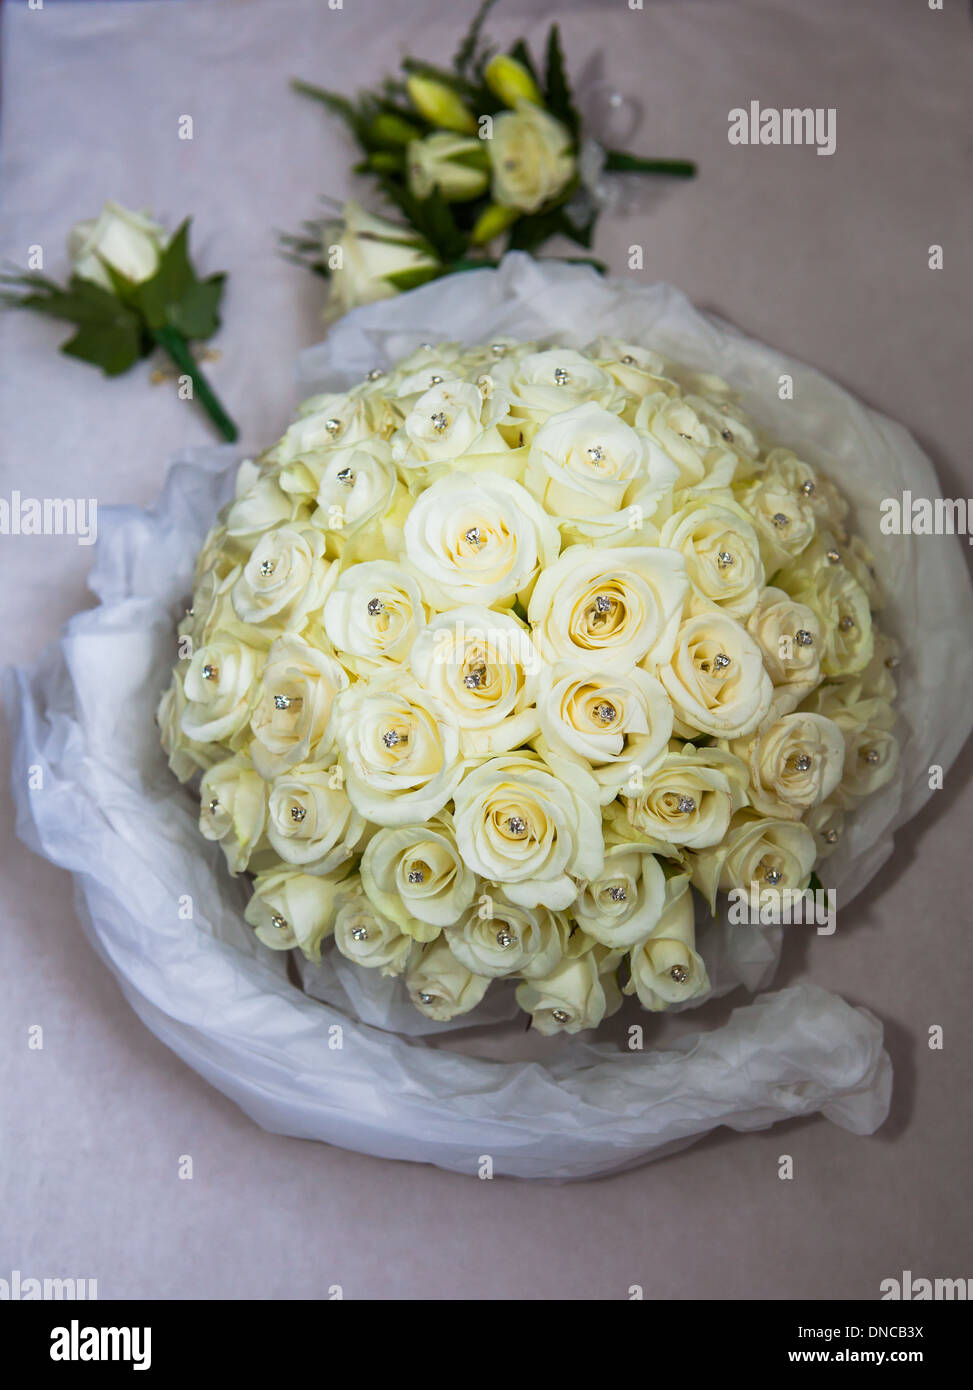 Brides wedding bouquet with button hole flowers Stock Photo